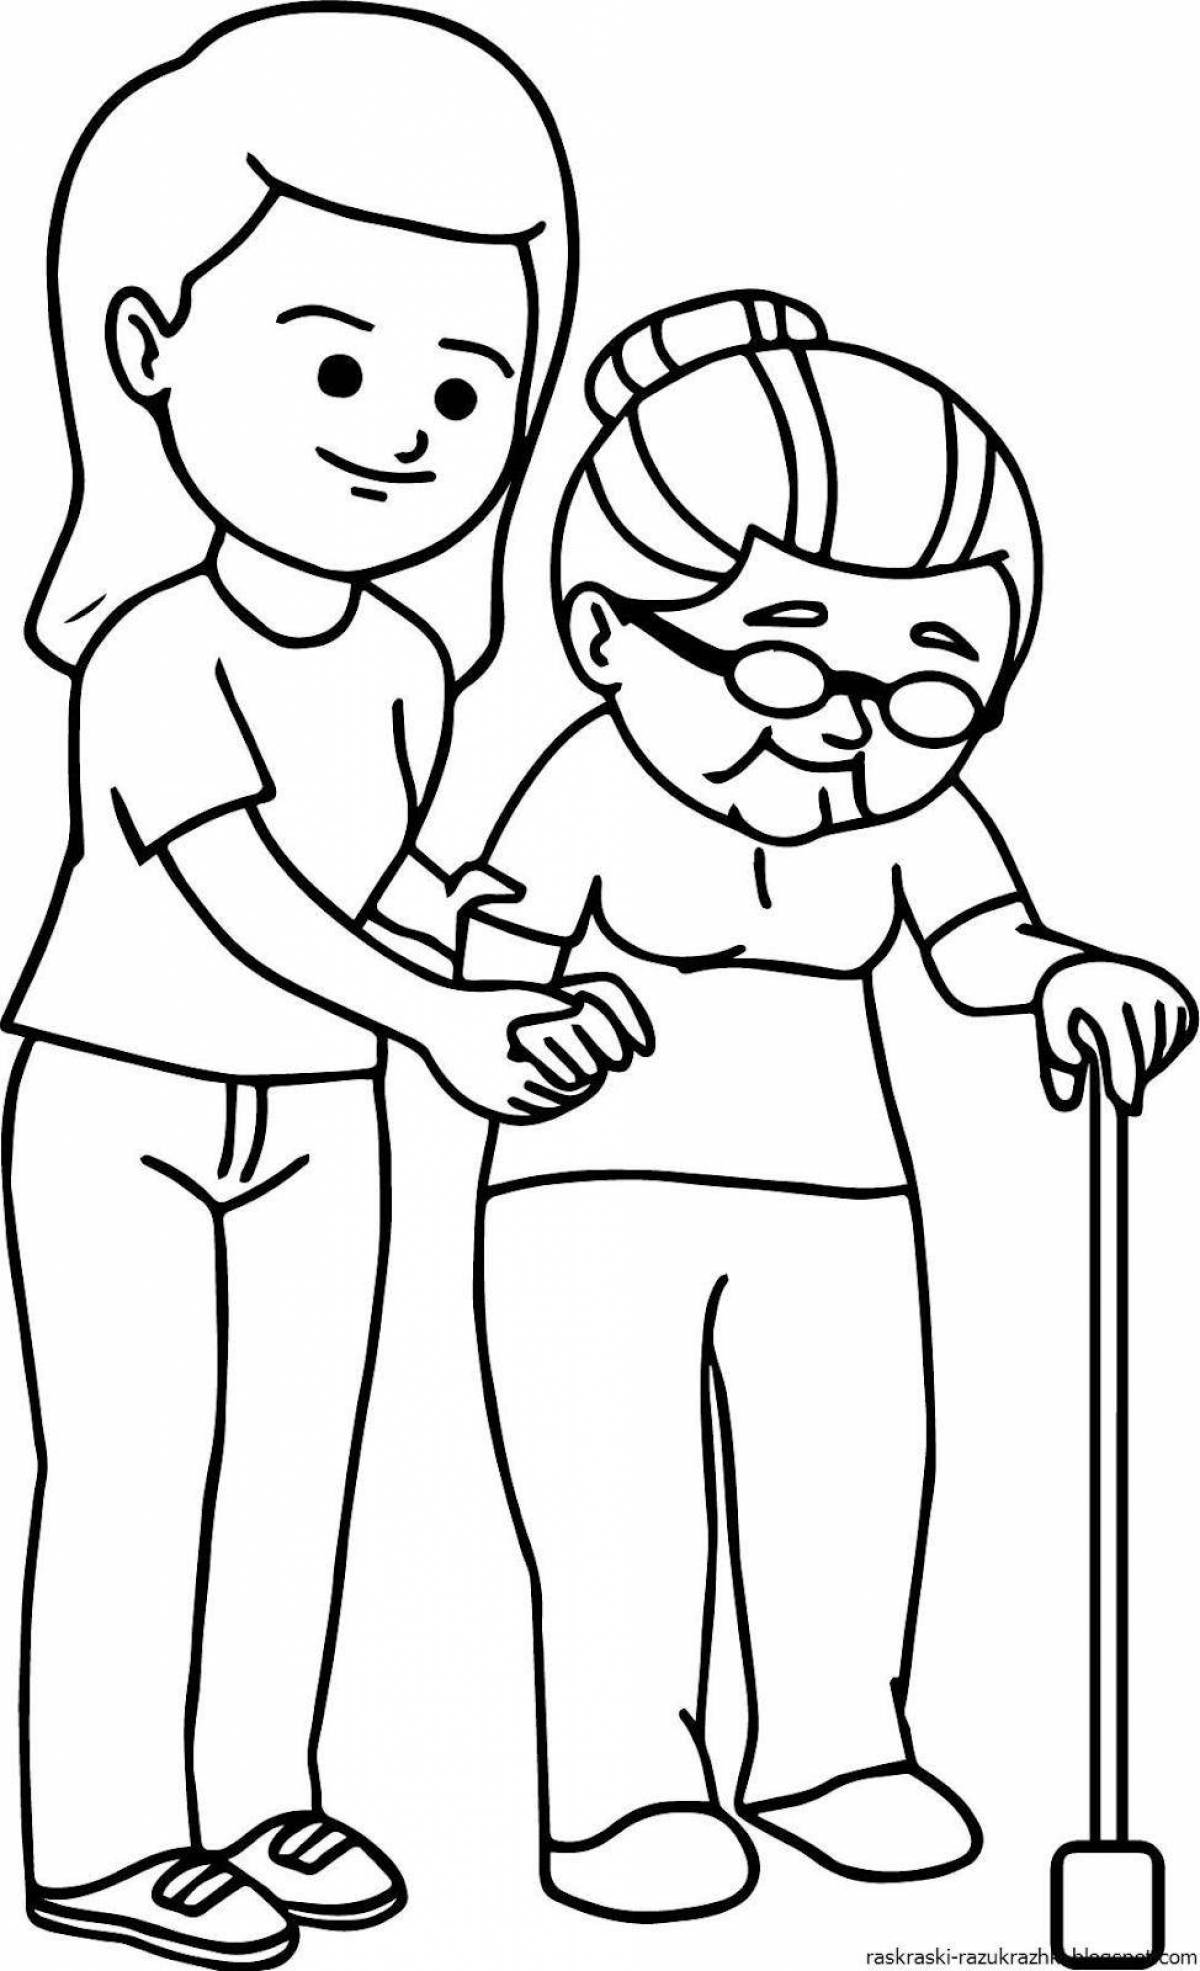 Coloring page passionate volunteers